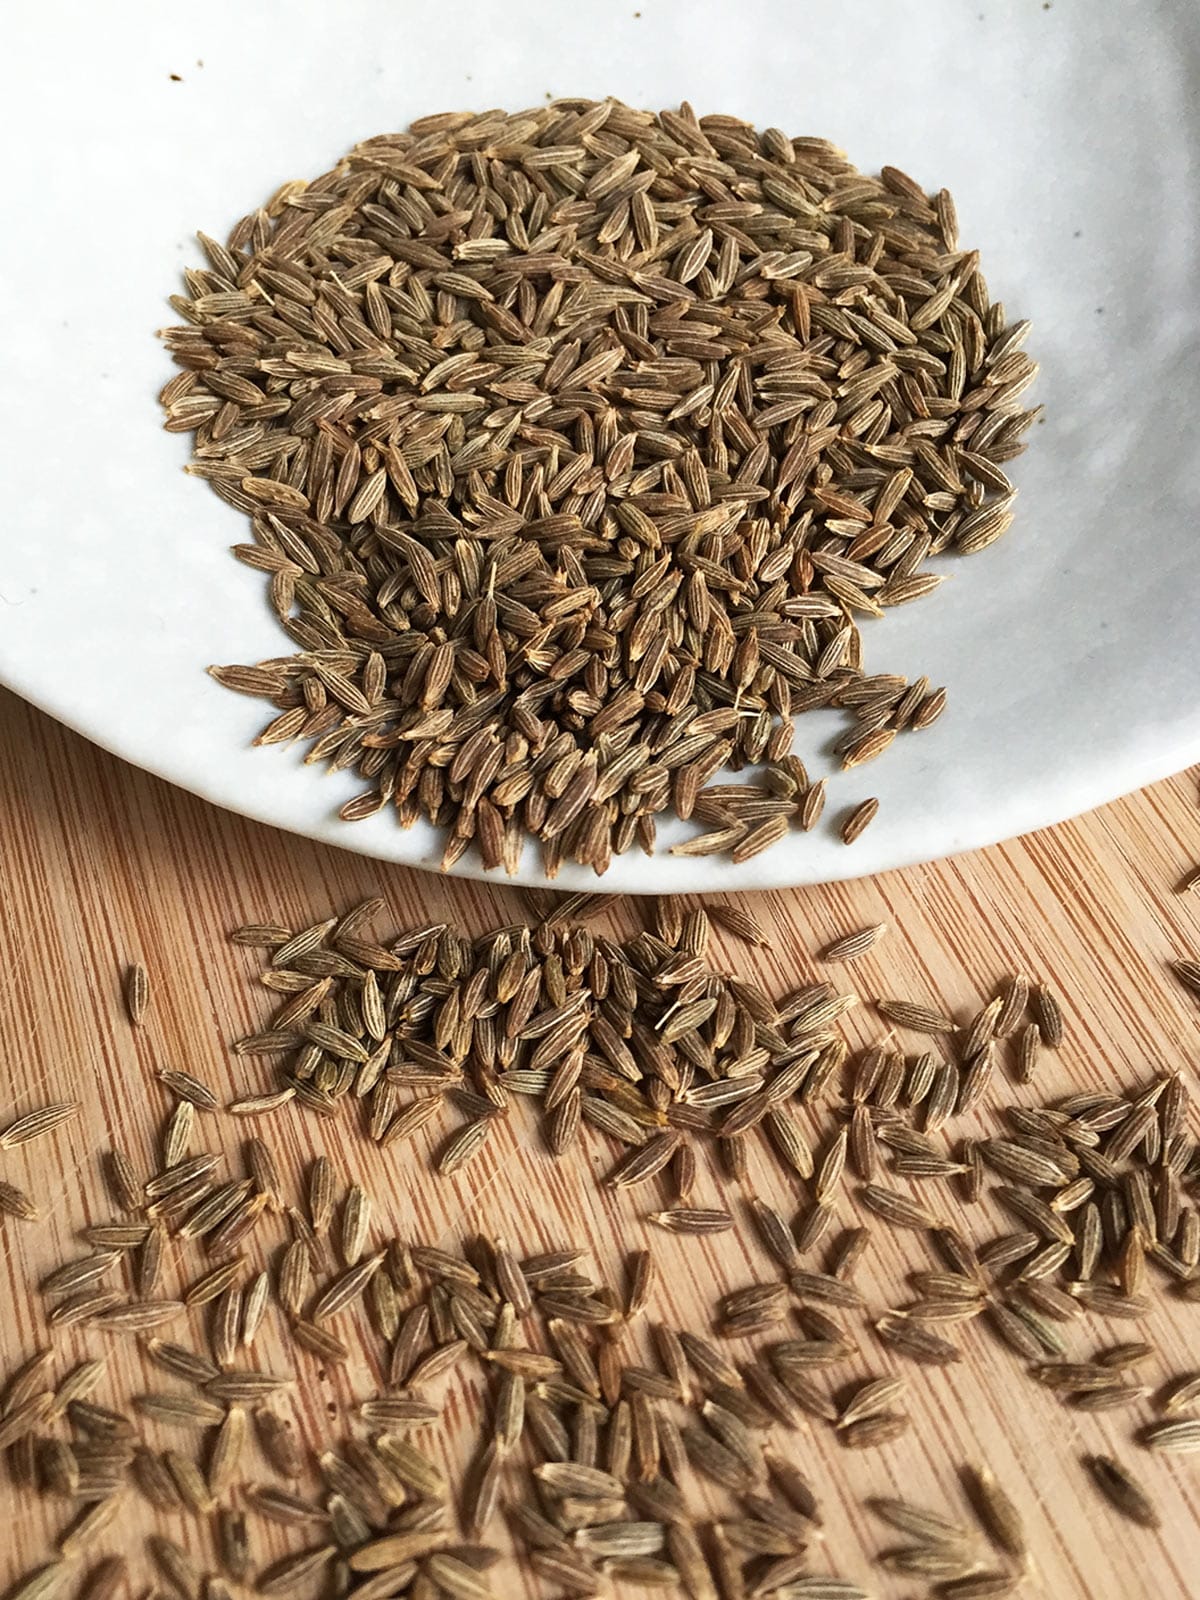 Cumin seeds in a white bowl overflowing onto a wooden board.